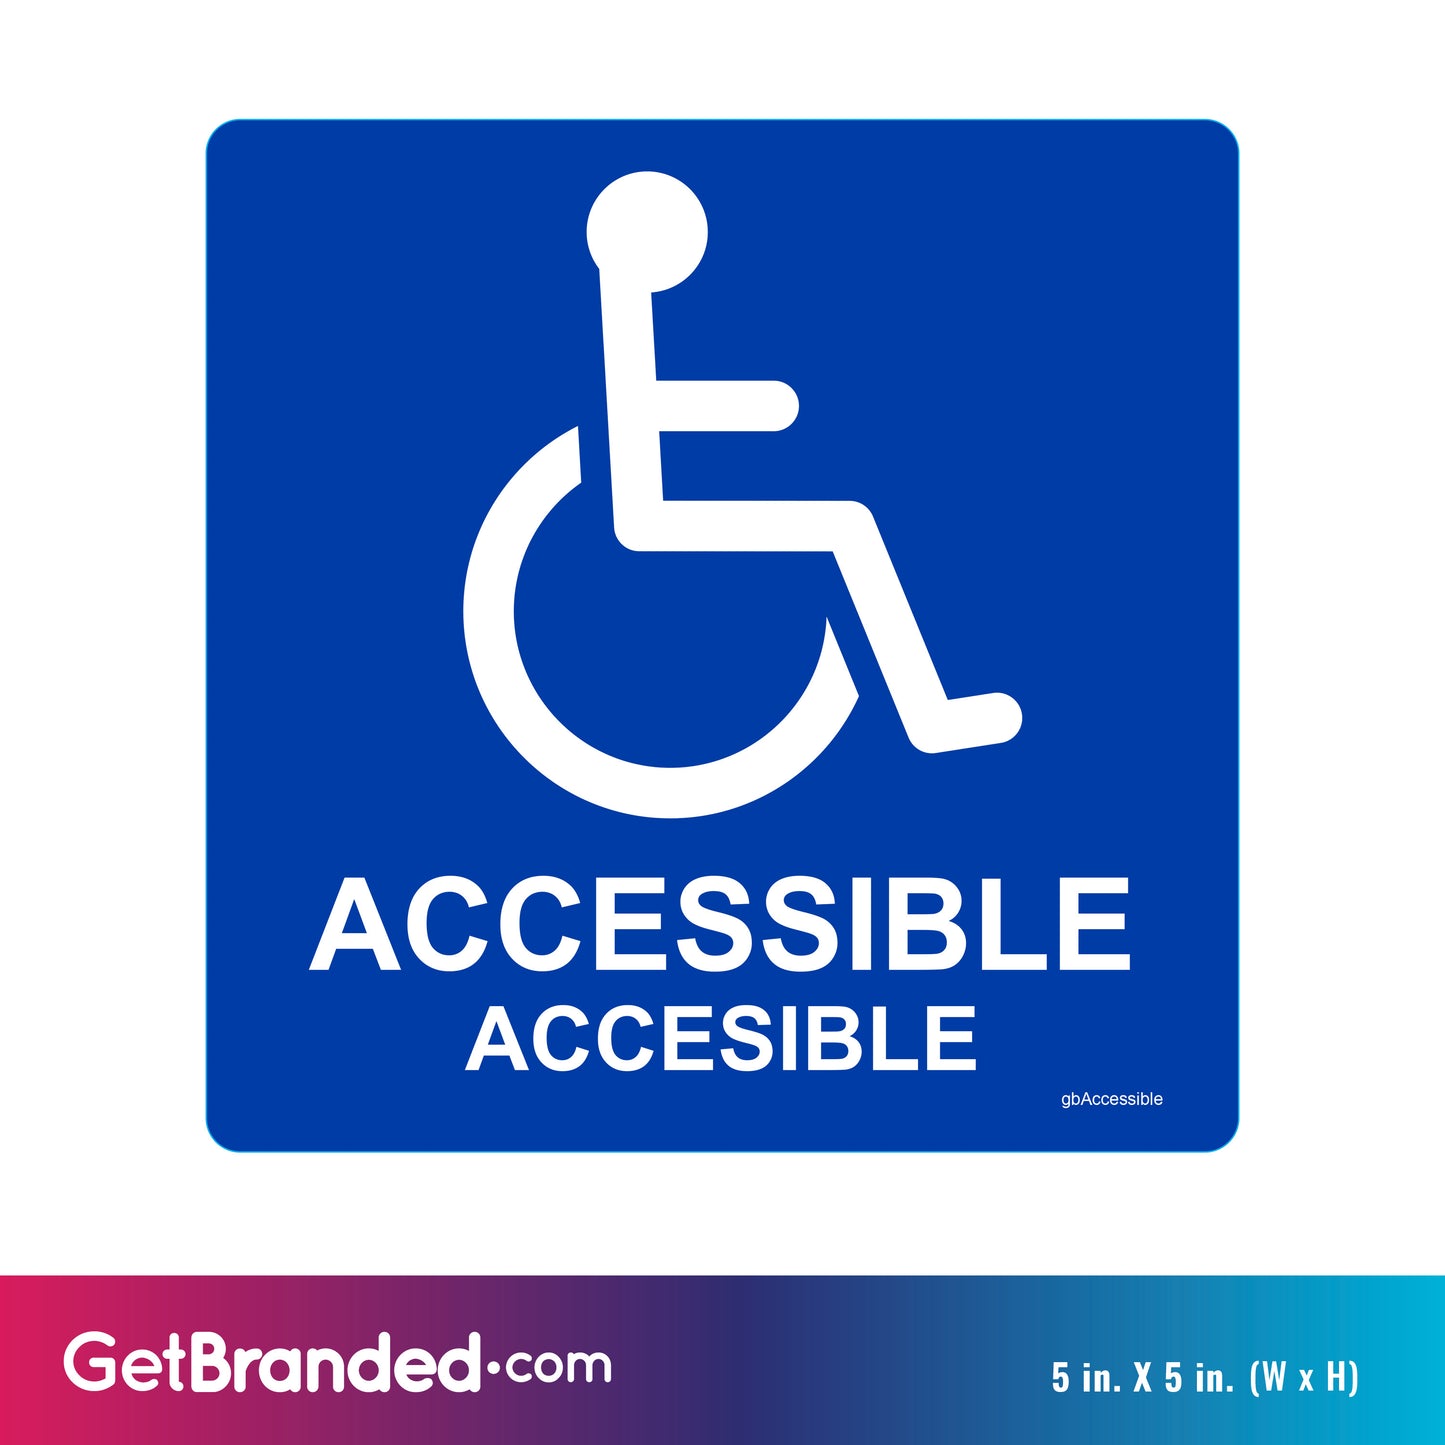 ADA Accessible Decal size guide.